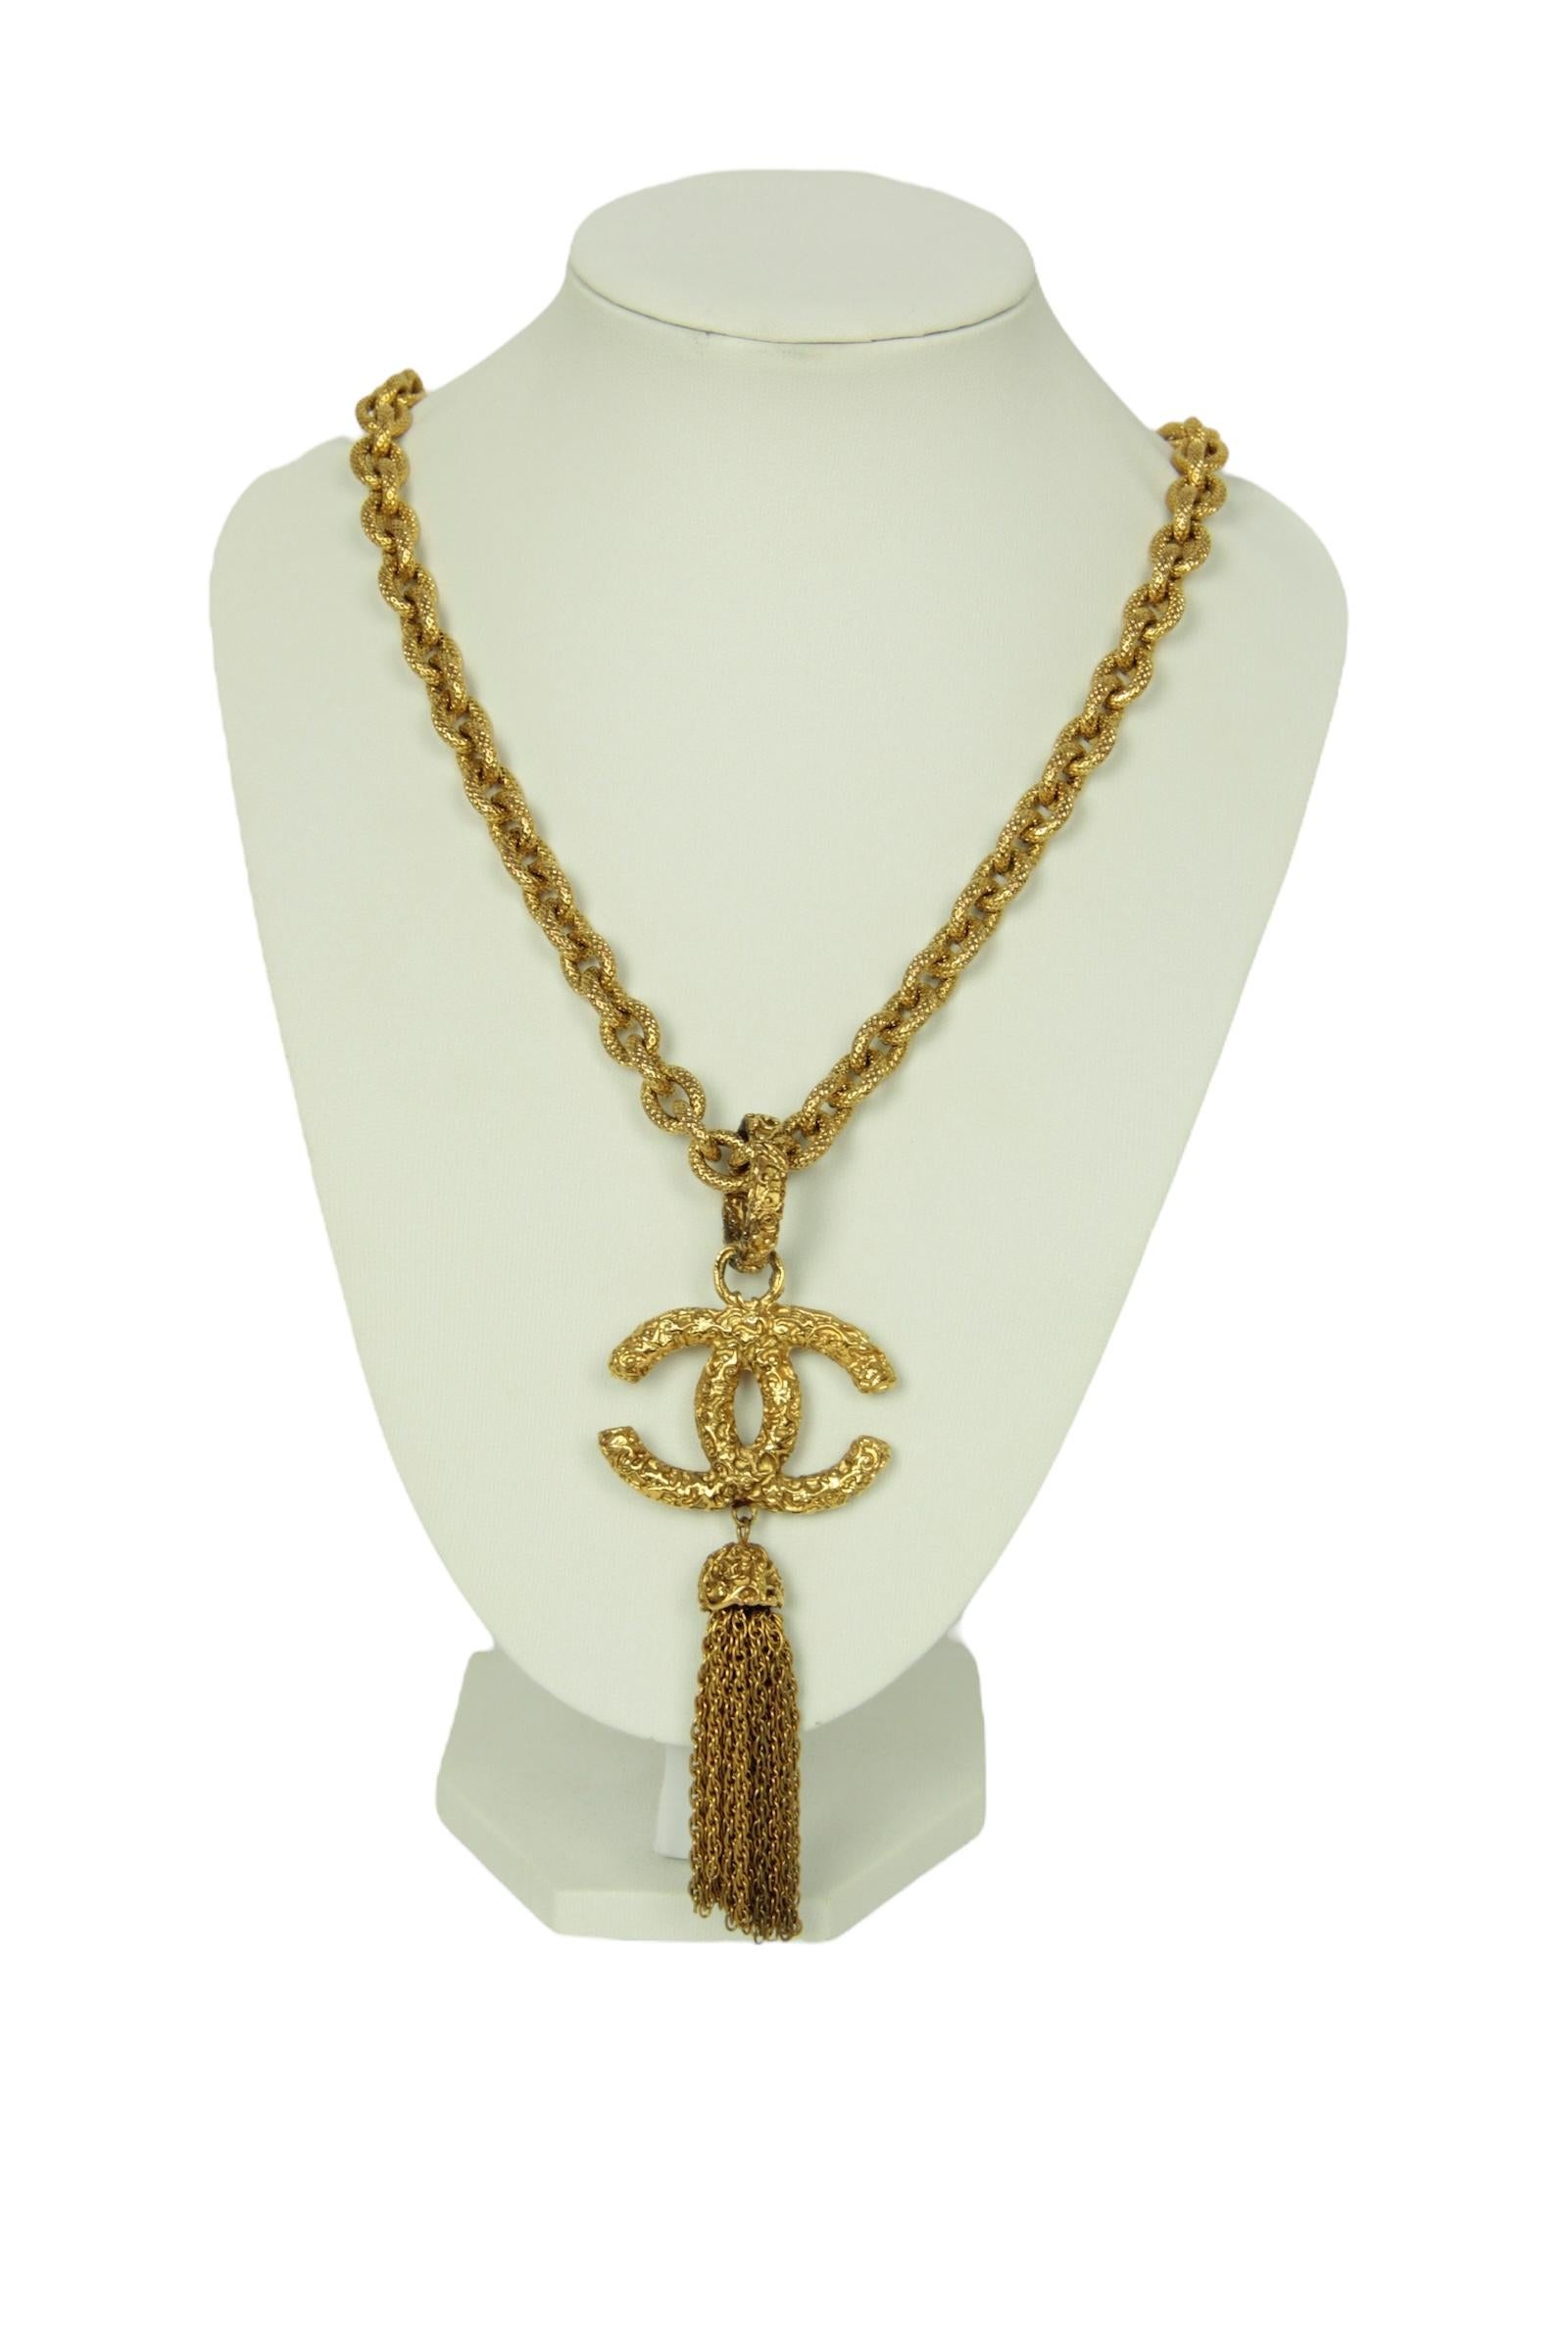 Chanel '90s Gold Vintage Textured CC Tassel Necklace In Excellent Condition For Sale In New York, NY